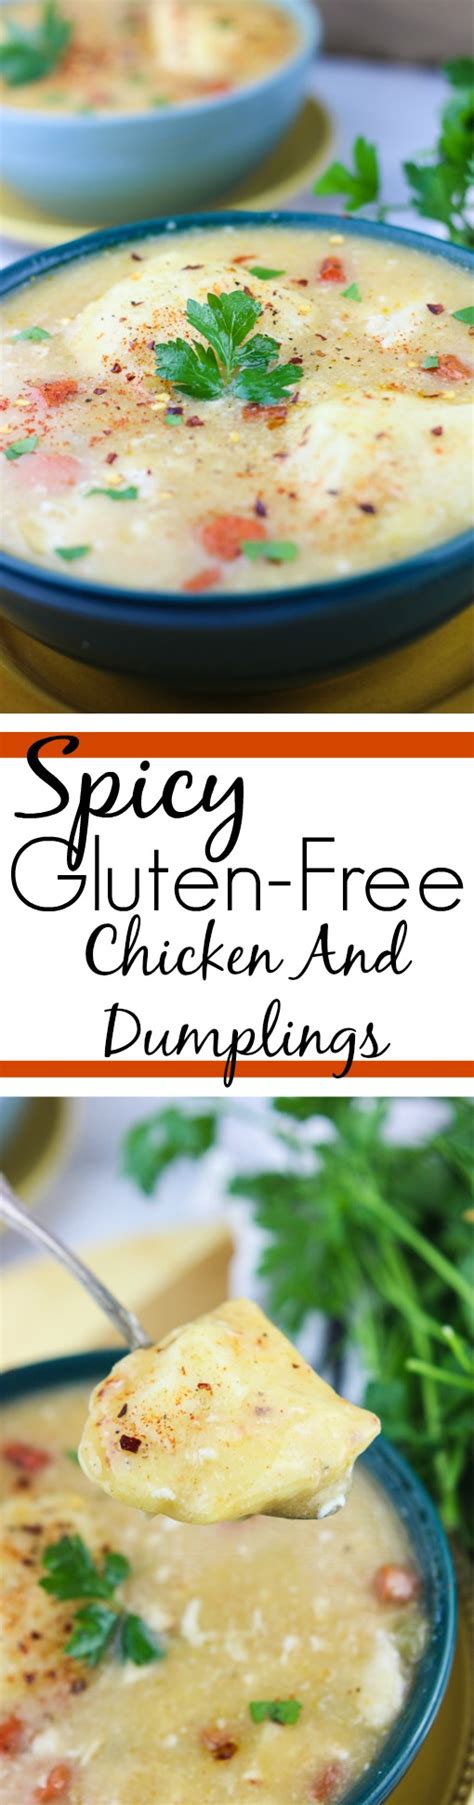 This easy bisquick chicken and dumplings recipe is an easy way to make chicken and dumplings like mom and grandma used to make! Gluten-Free Crock Pot Chicken Dumplings